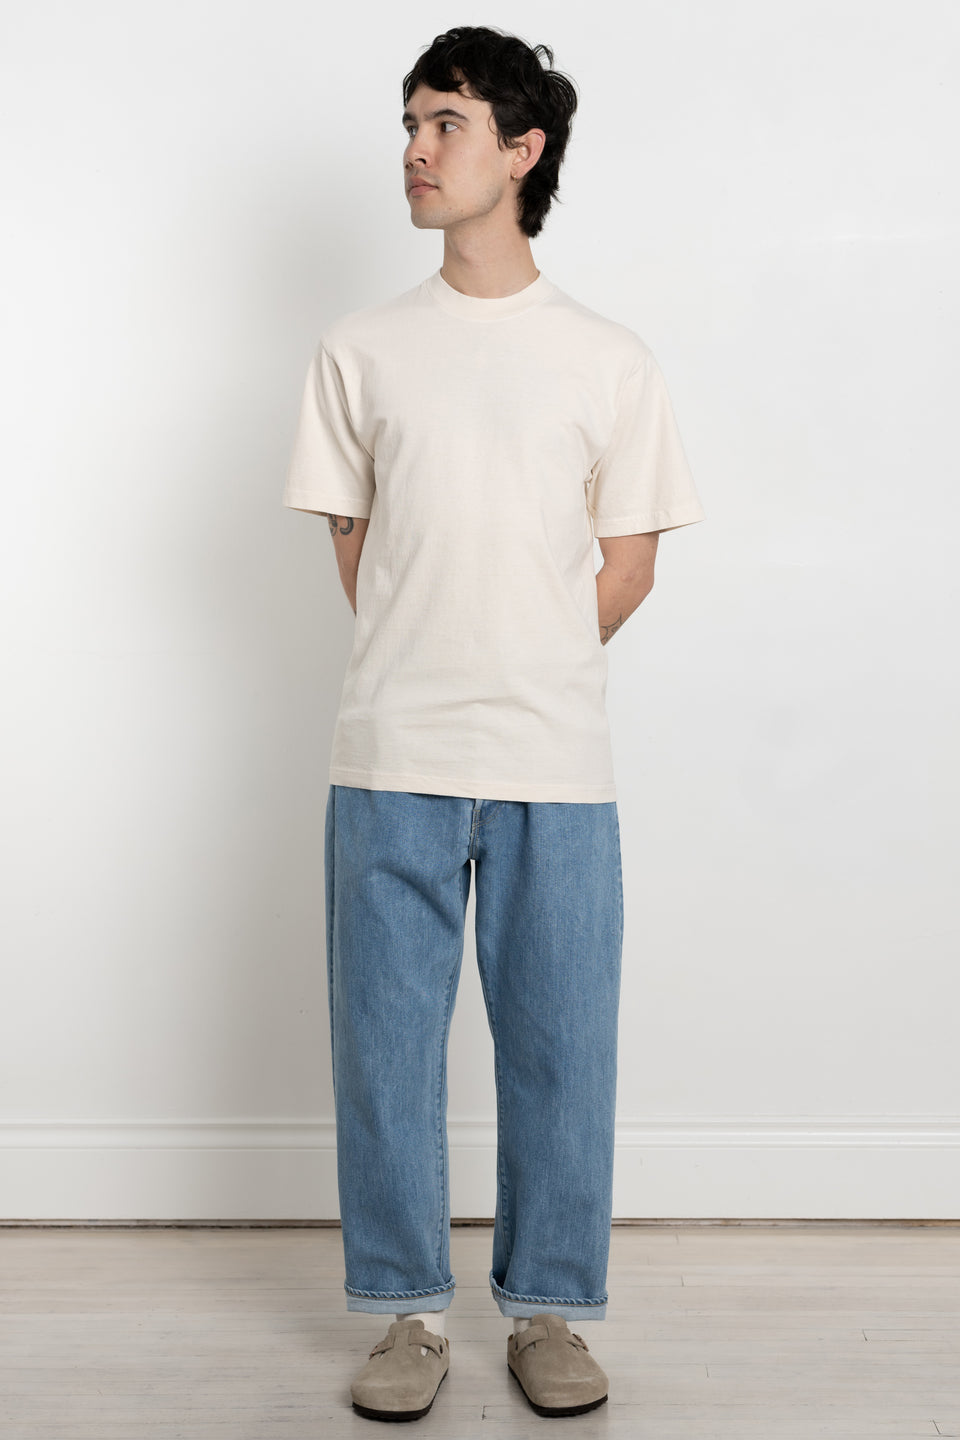 Garment Dyed US Cotton Tee Écru Men's Made in USA Calculus Online